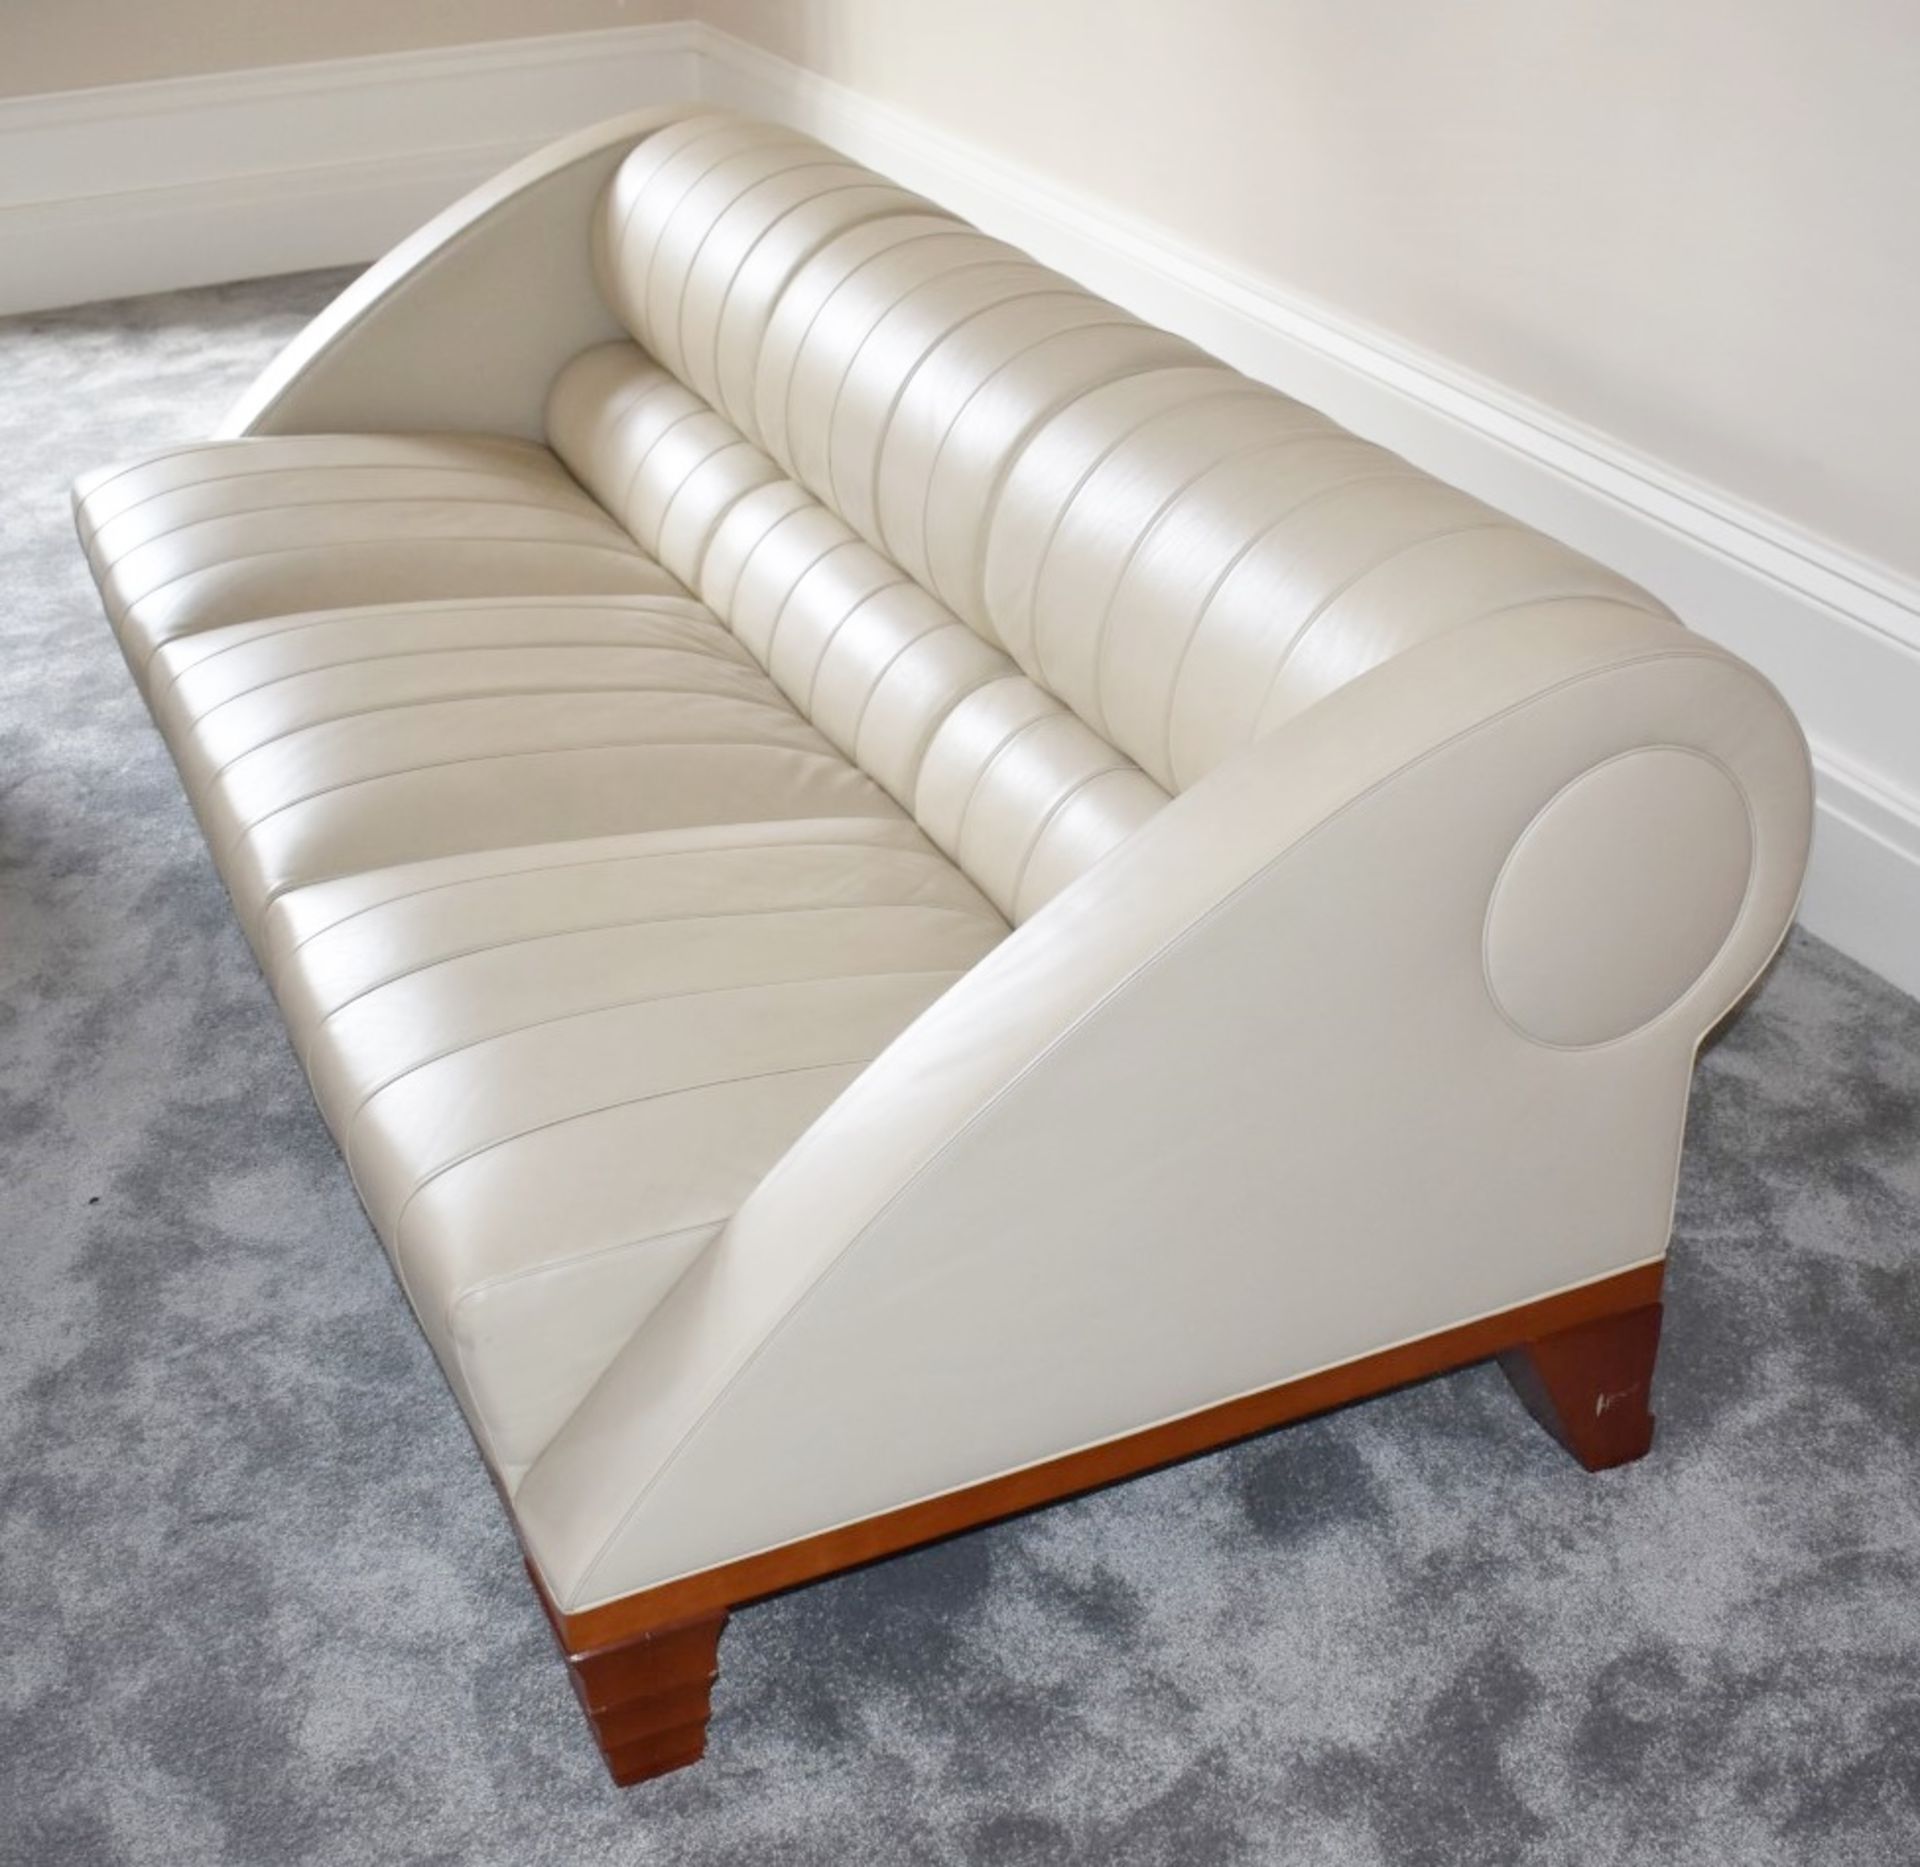 1 x Giorgetti Aries Three Seater Leather Sofa - Designed by Leon Krier - Contemporary Sofa - Image 9 of 10